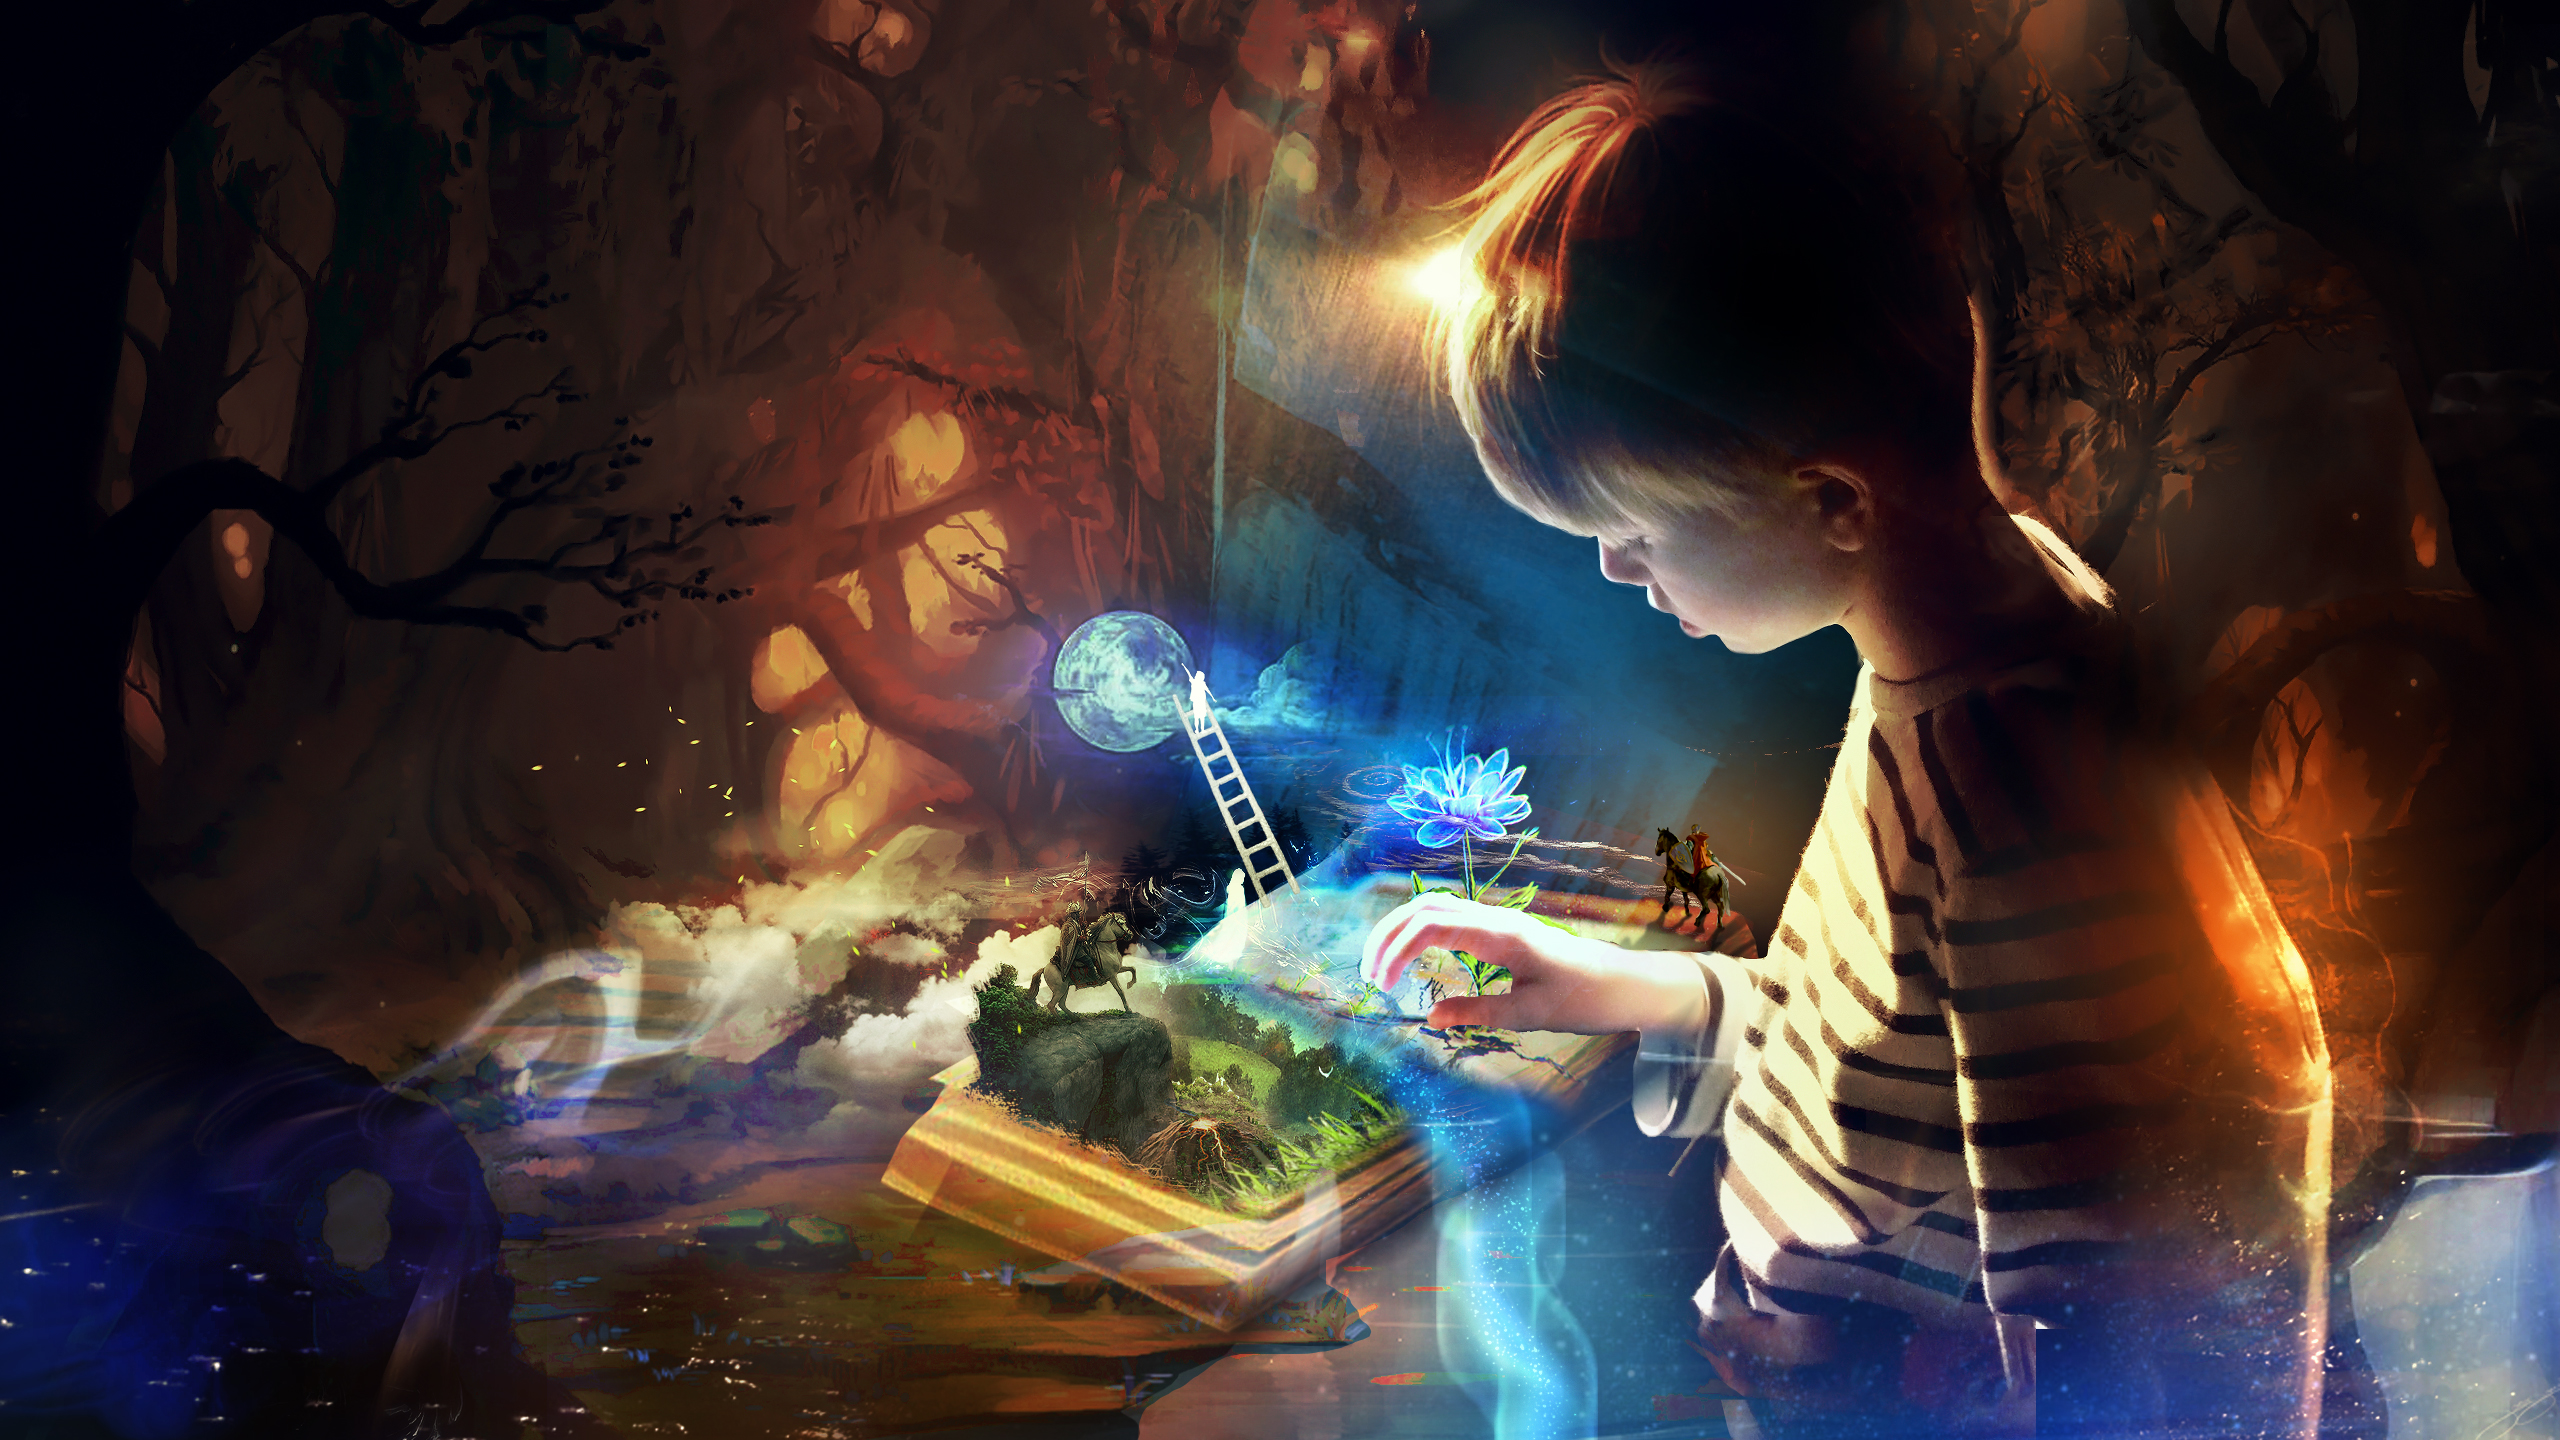 book_of_imagination_by_t1na-d7mlgj9.jpg